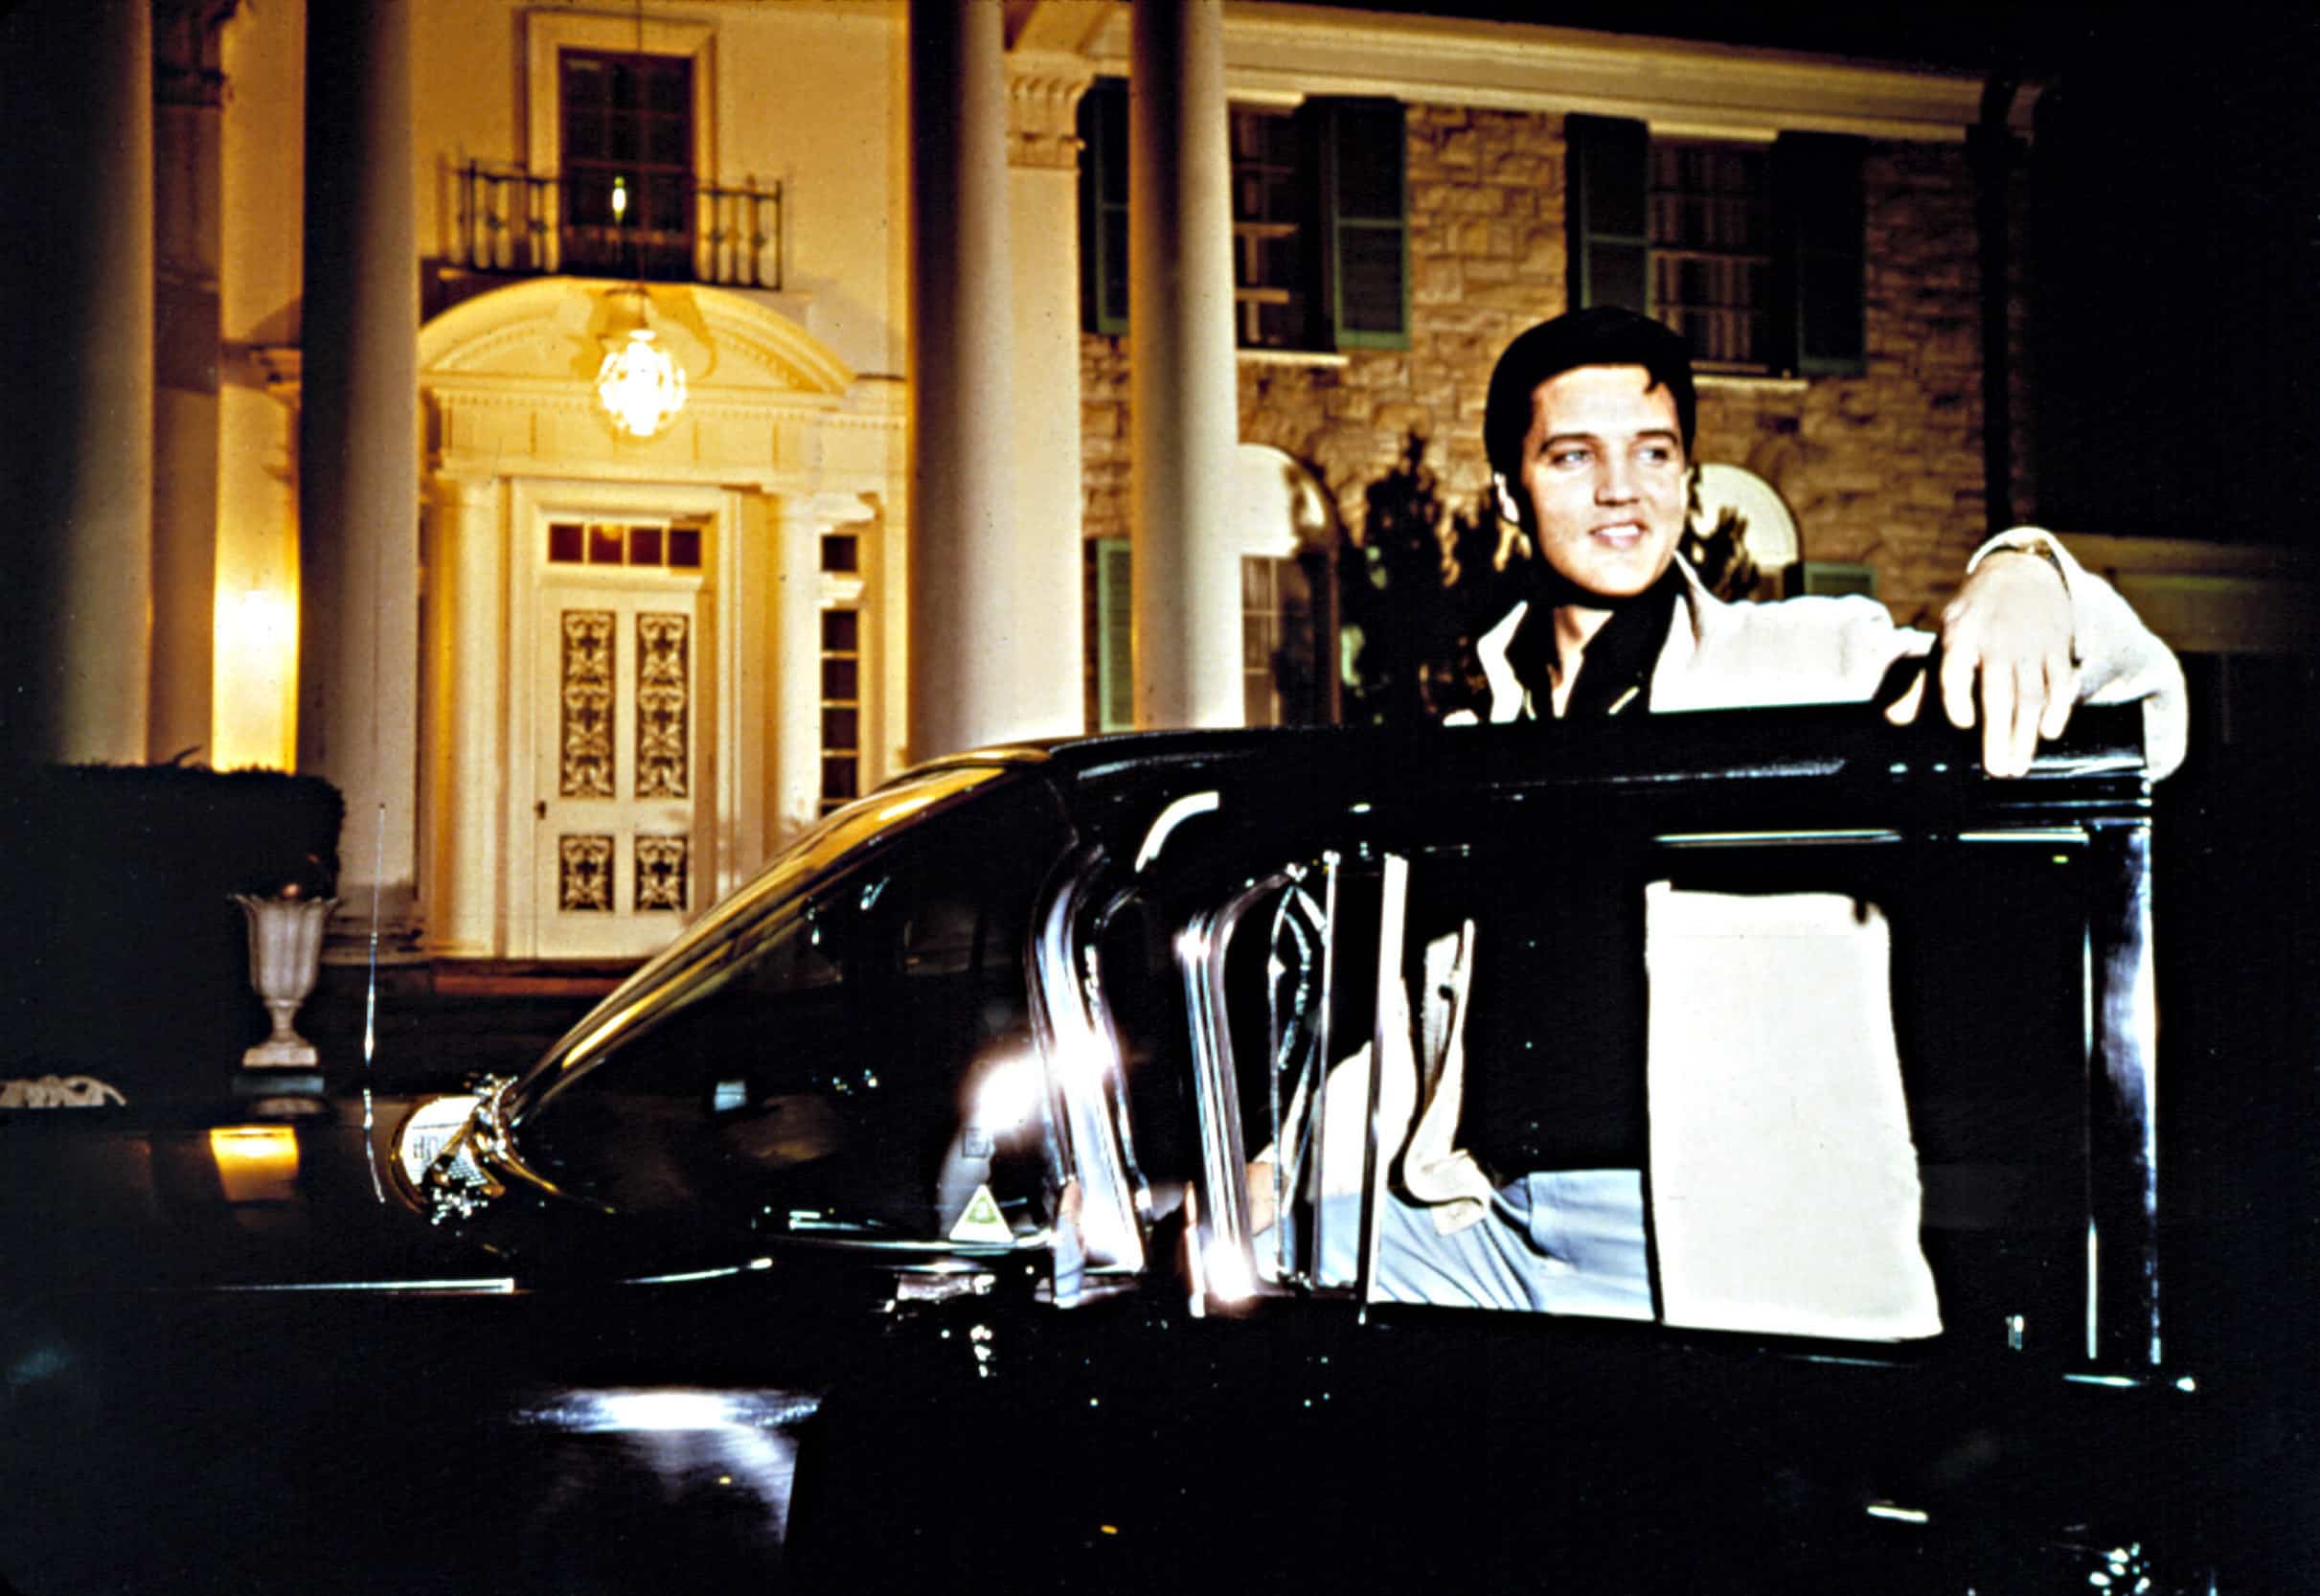 ELVIS PRESLEY, getting into his Cadillac car, in front of Graceland, circa early 1960s